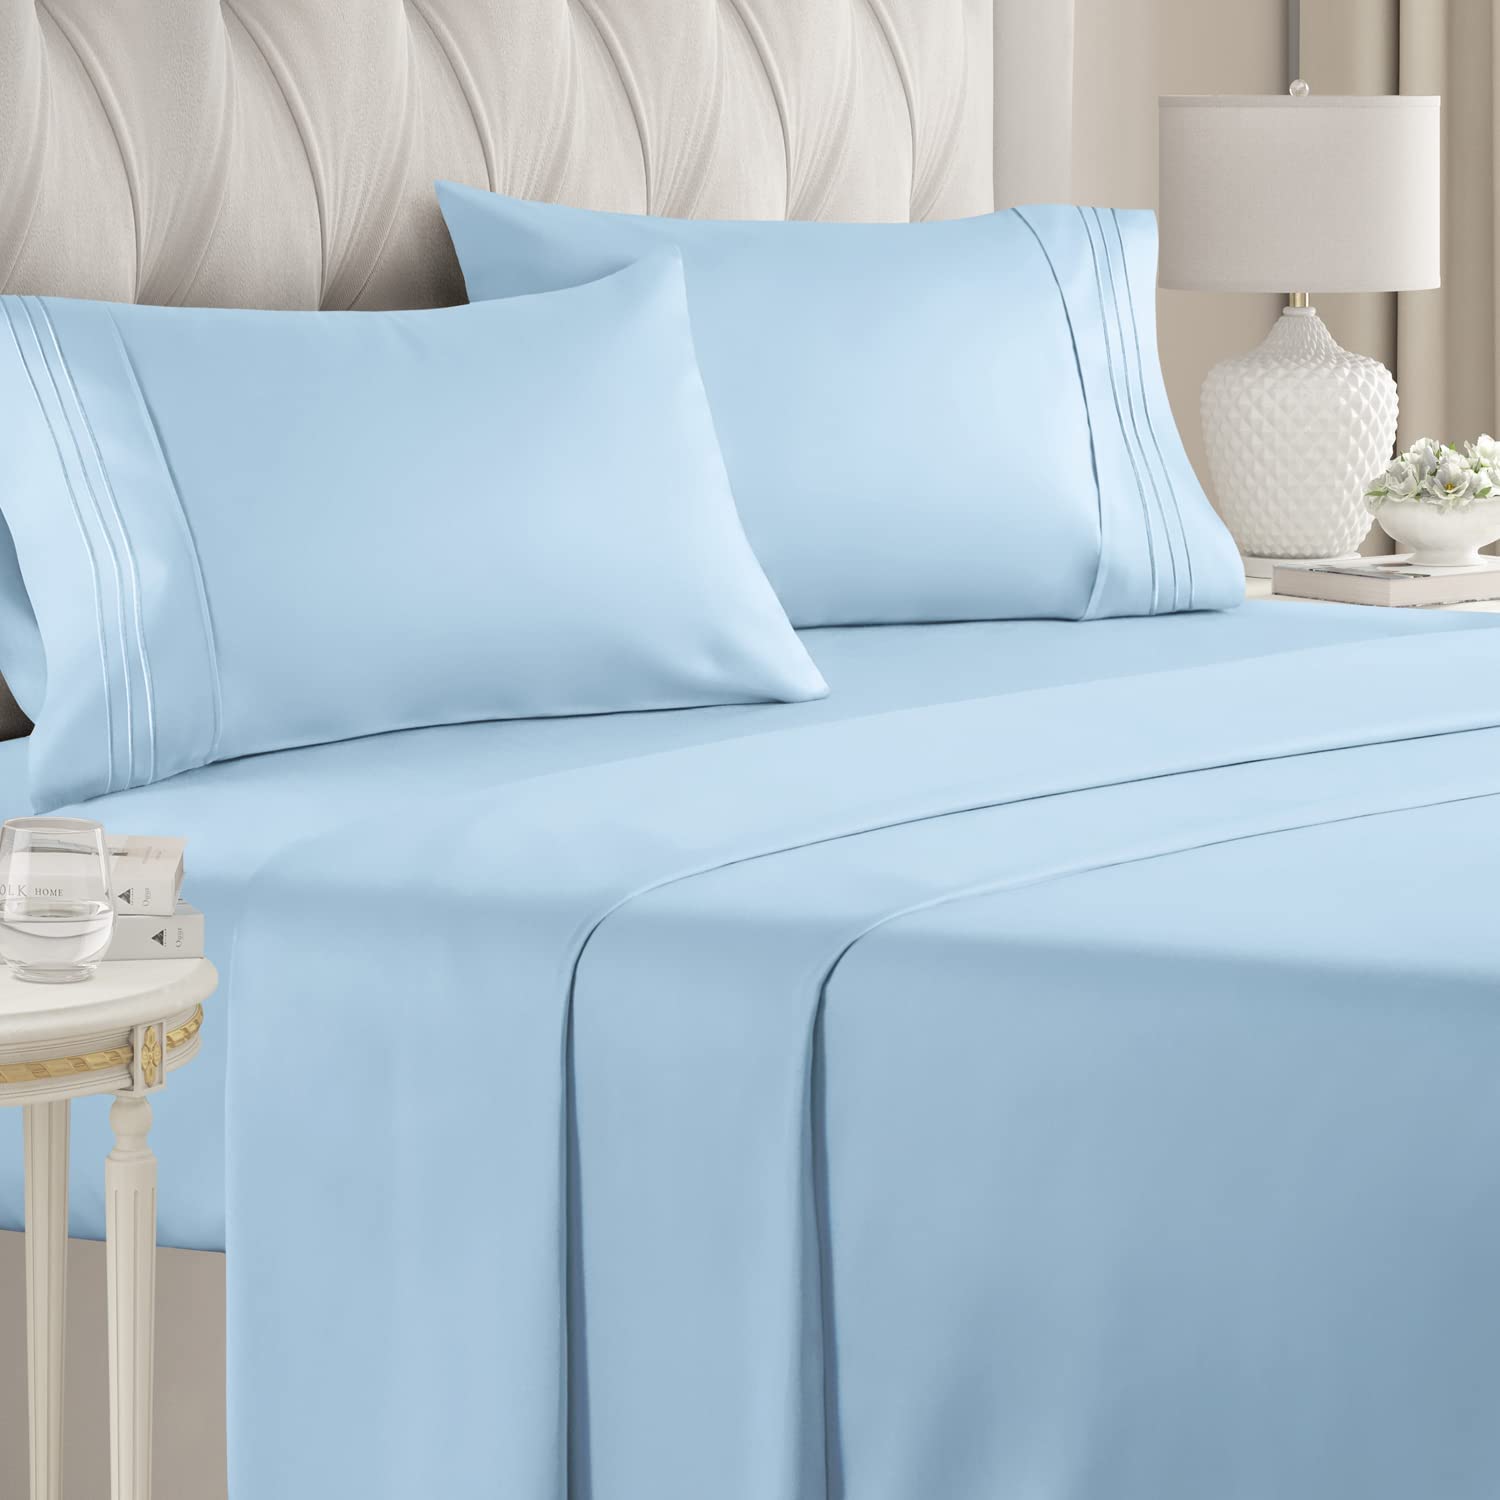 Buy Twin Extra Large Blue Color Flat Sheet Egyptian Cotton 1000TC Twin-XL at- Egyptianhomelinens.com